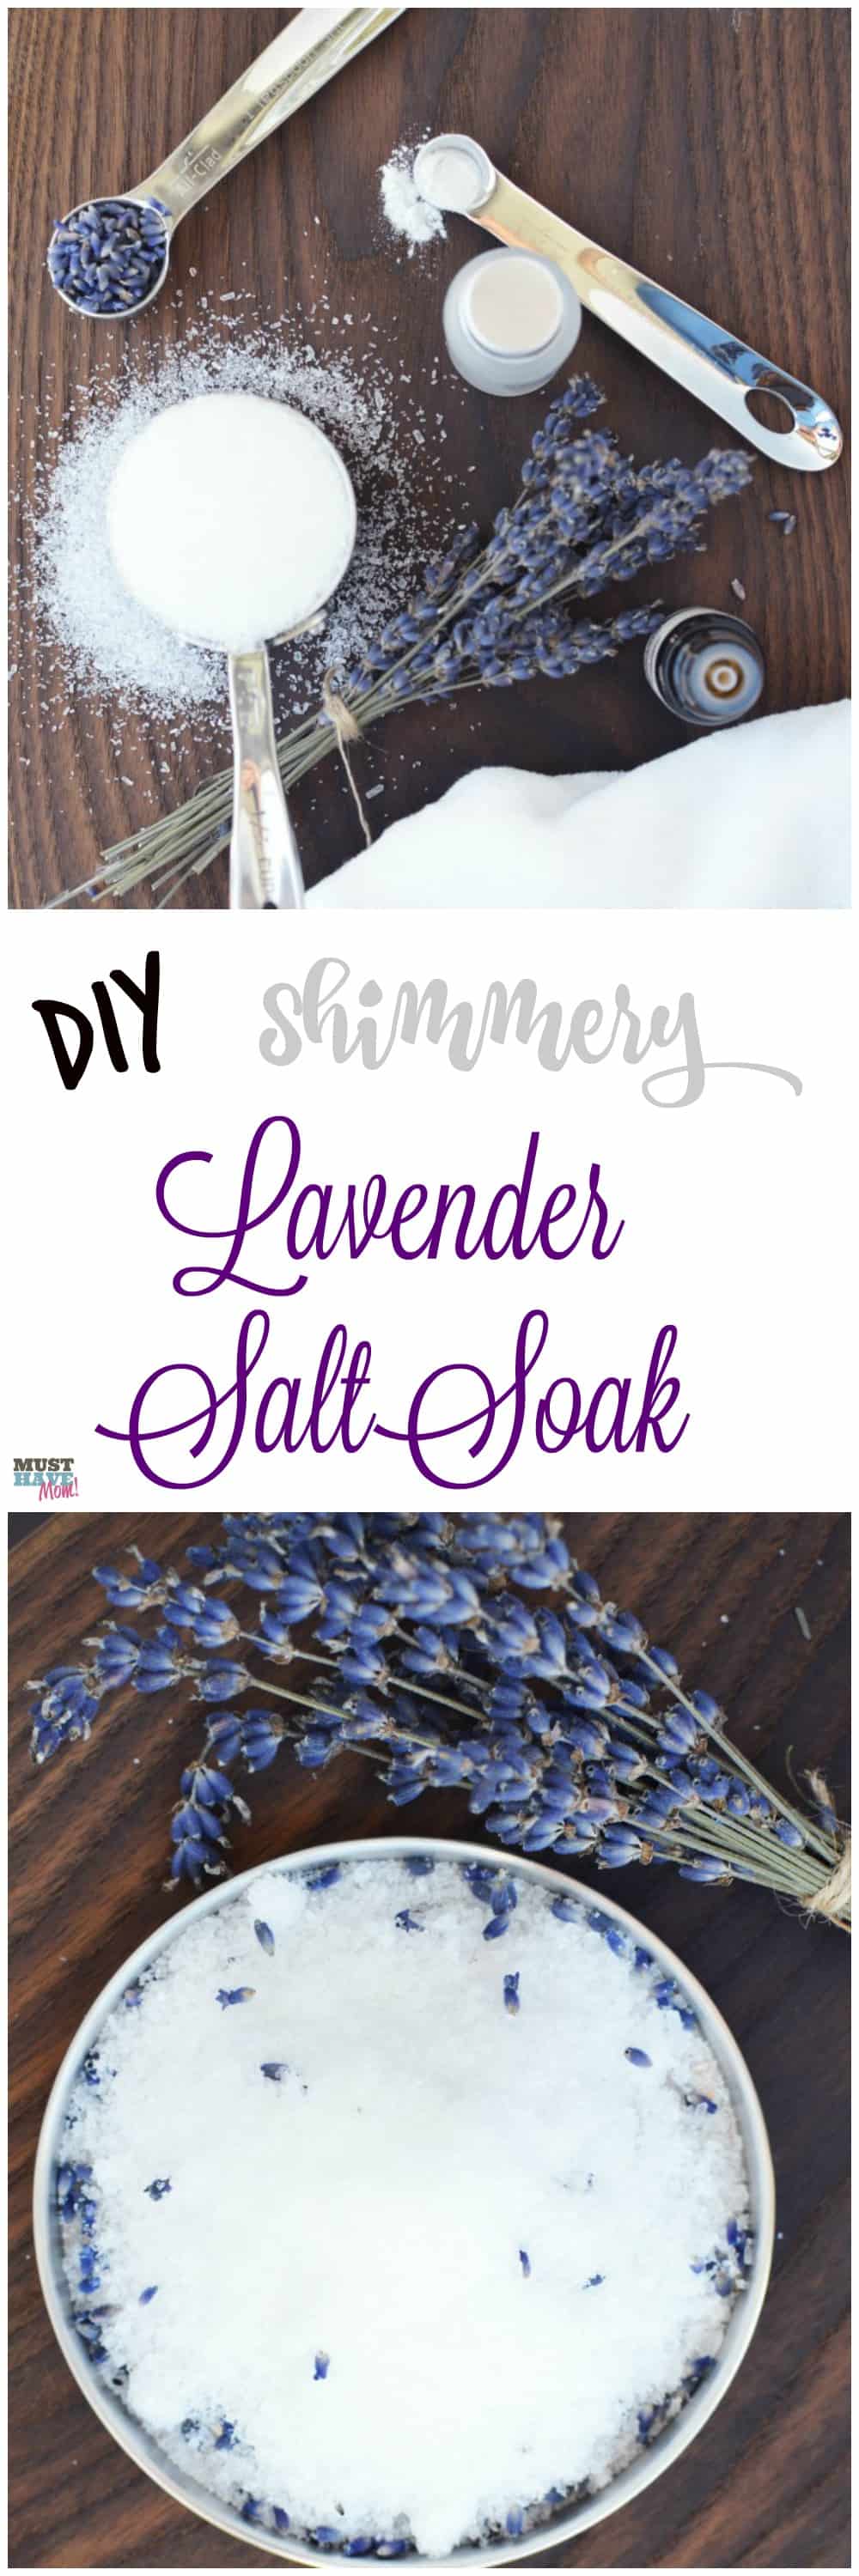 Shimmery lavender salt soak just like the spa! This bath salt recipe is easy and so luxurious! Makes a great DIY gift idea too.